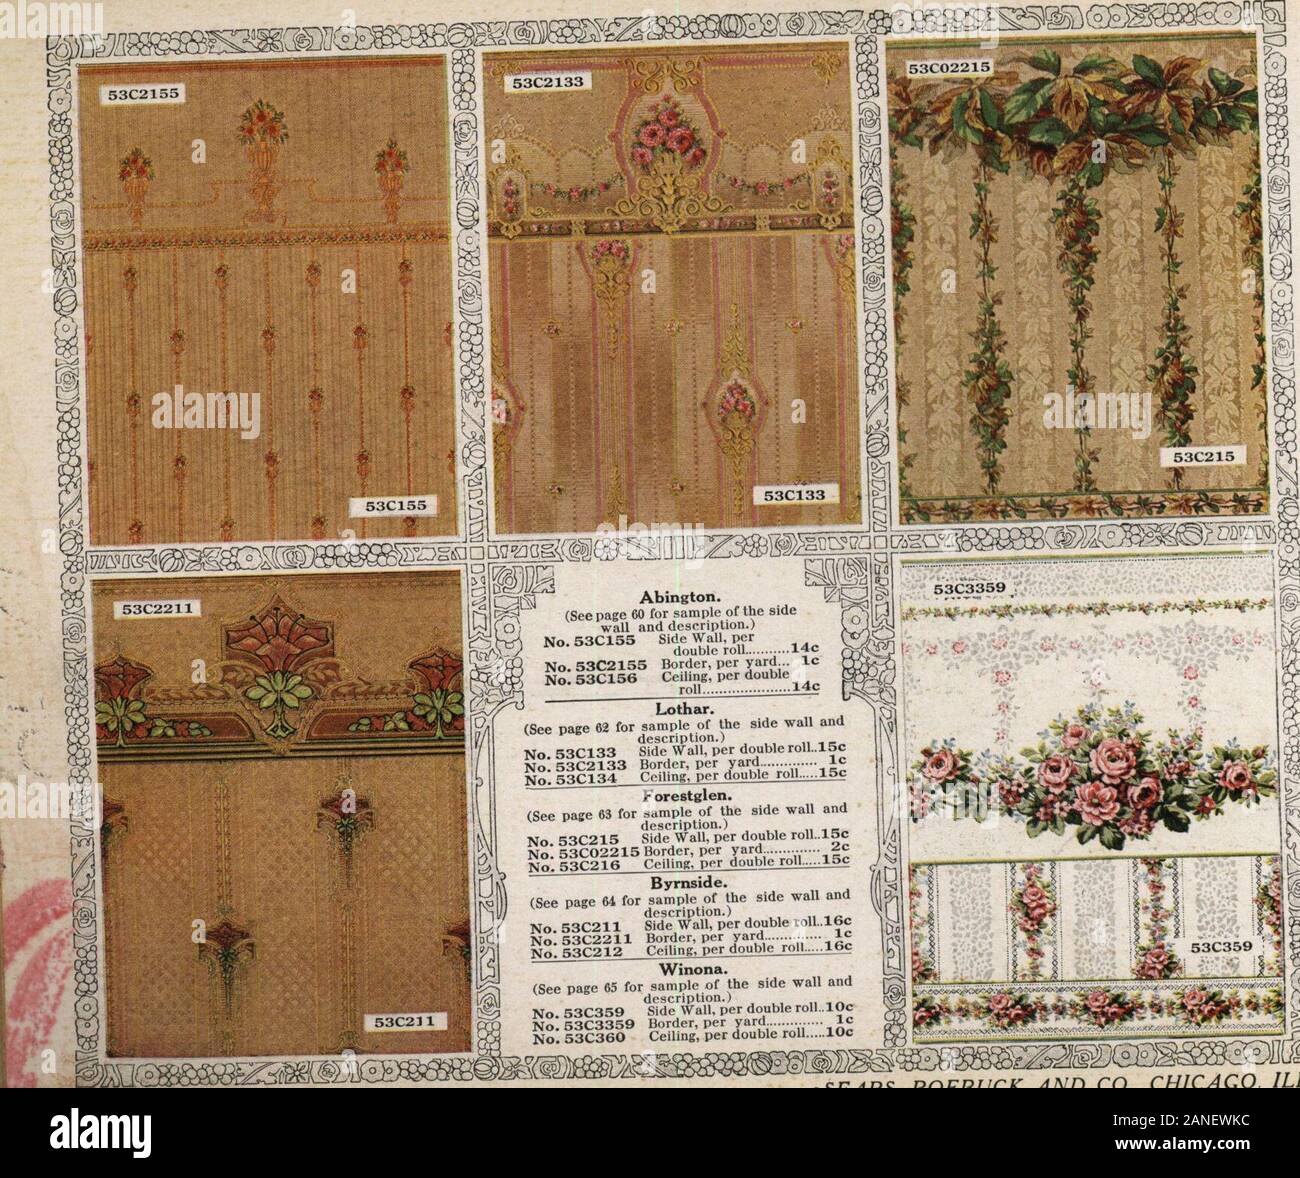 Wall paper for every home, 1916 . SE.4RS. ROEBUCK AND CO.. CHICAGO ILL. Abington. (See page 60 for sample of the sidewall and description.)No. 53C155 Side Wall, per double roll 14c No. 53C2155 Border, per yard lcNo, 53C156 Ceiling, per double roll 14C Lothar.(See page 62 for sample of the side wall and description.)No. 53C133 Side Wall, per double roll,.15cNo. 53C2133 Border, per yard ....?•••- Jc No. R3f.134 Ceiling, per double roll 15c Forestglen.(See page 6S for sample of the side wall and description.)No 53C215 Side Wall, per double roll.. 15c No. 53C02215 Border, per yard ft*-ST No. 53C21 Stock Photo